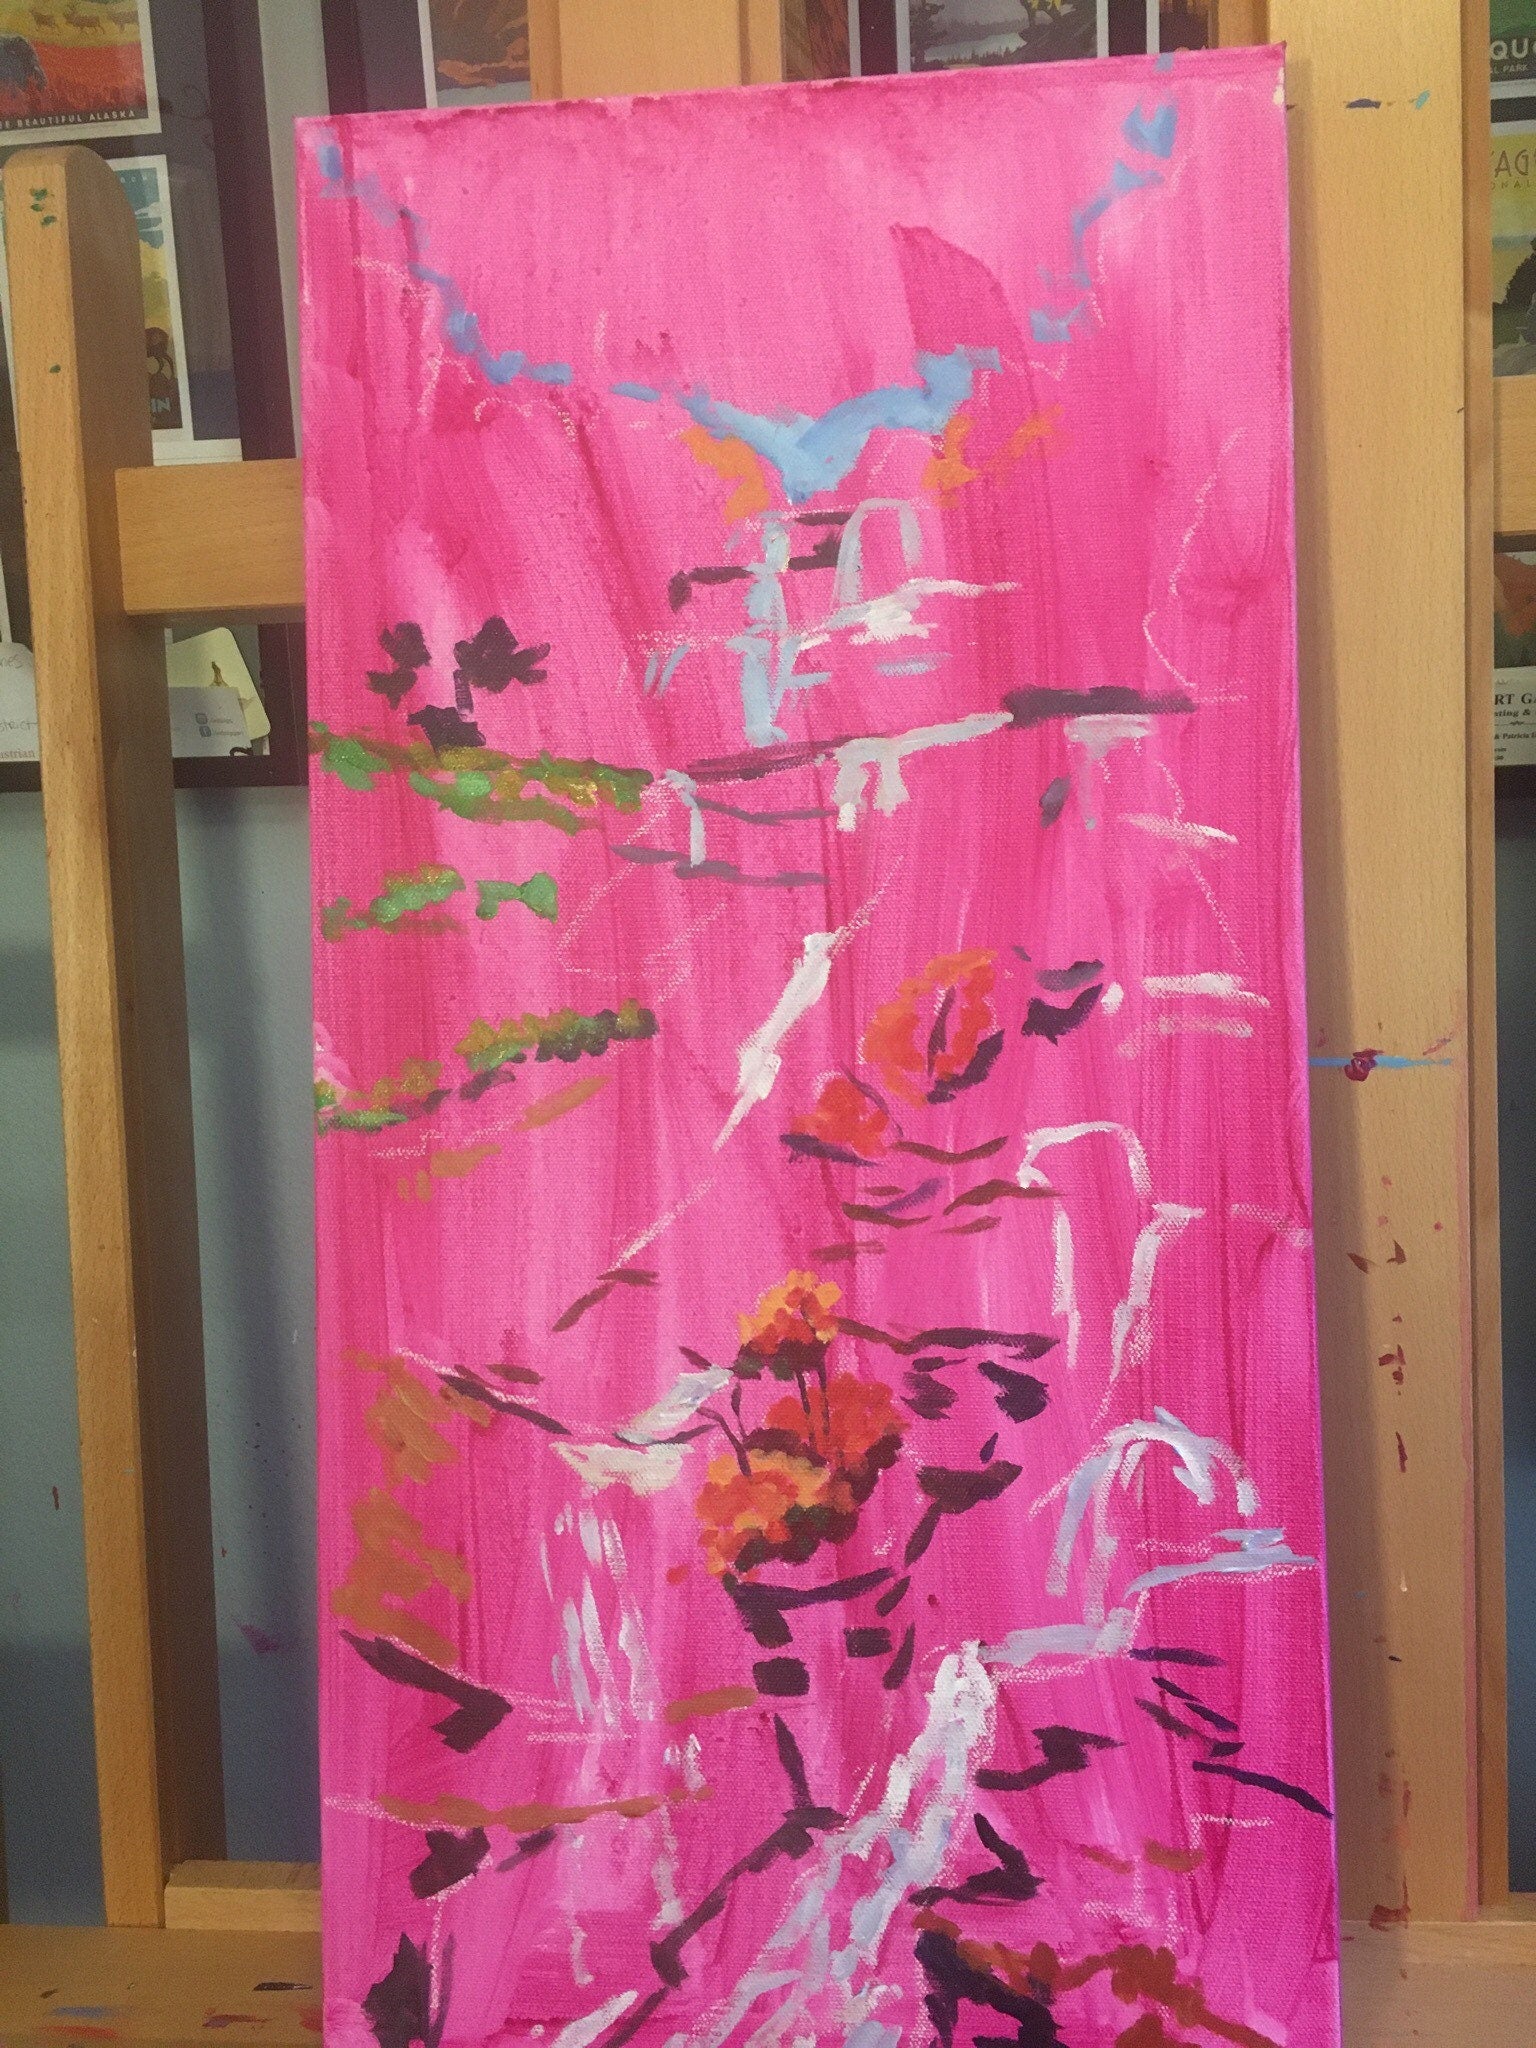 painting in progress with magenta wash